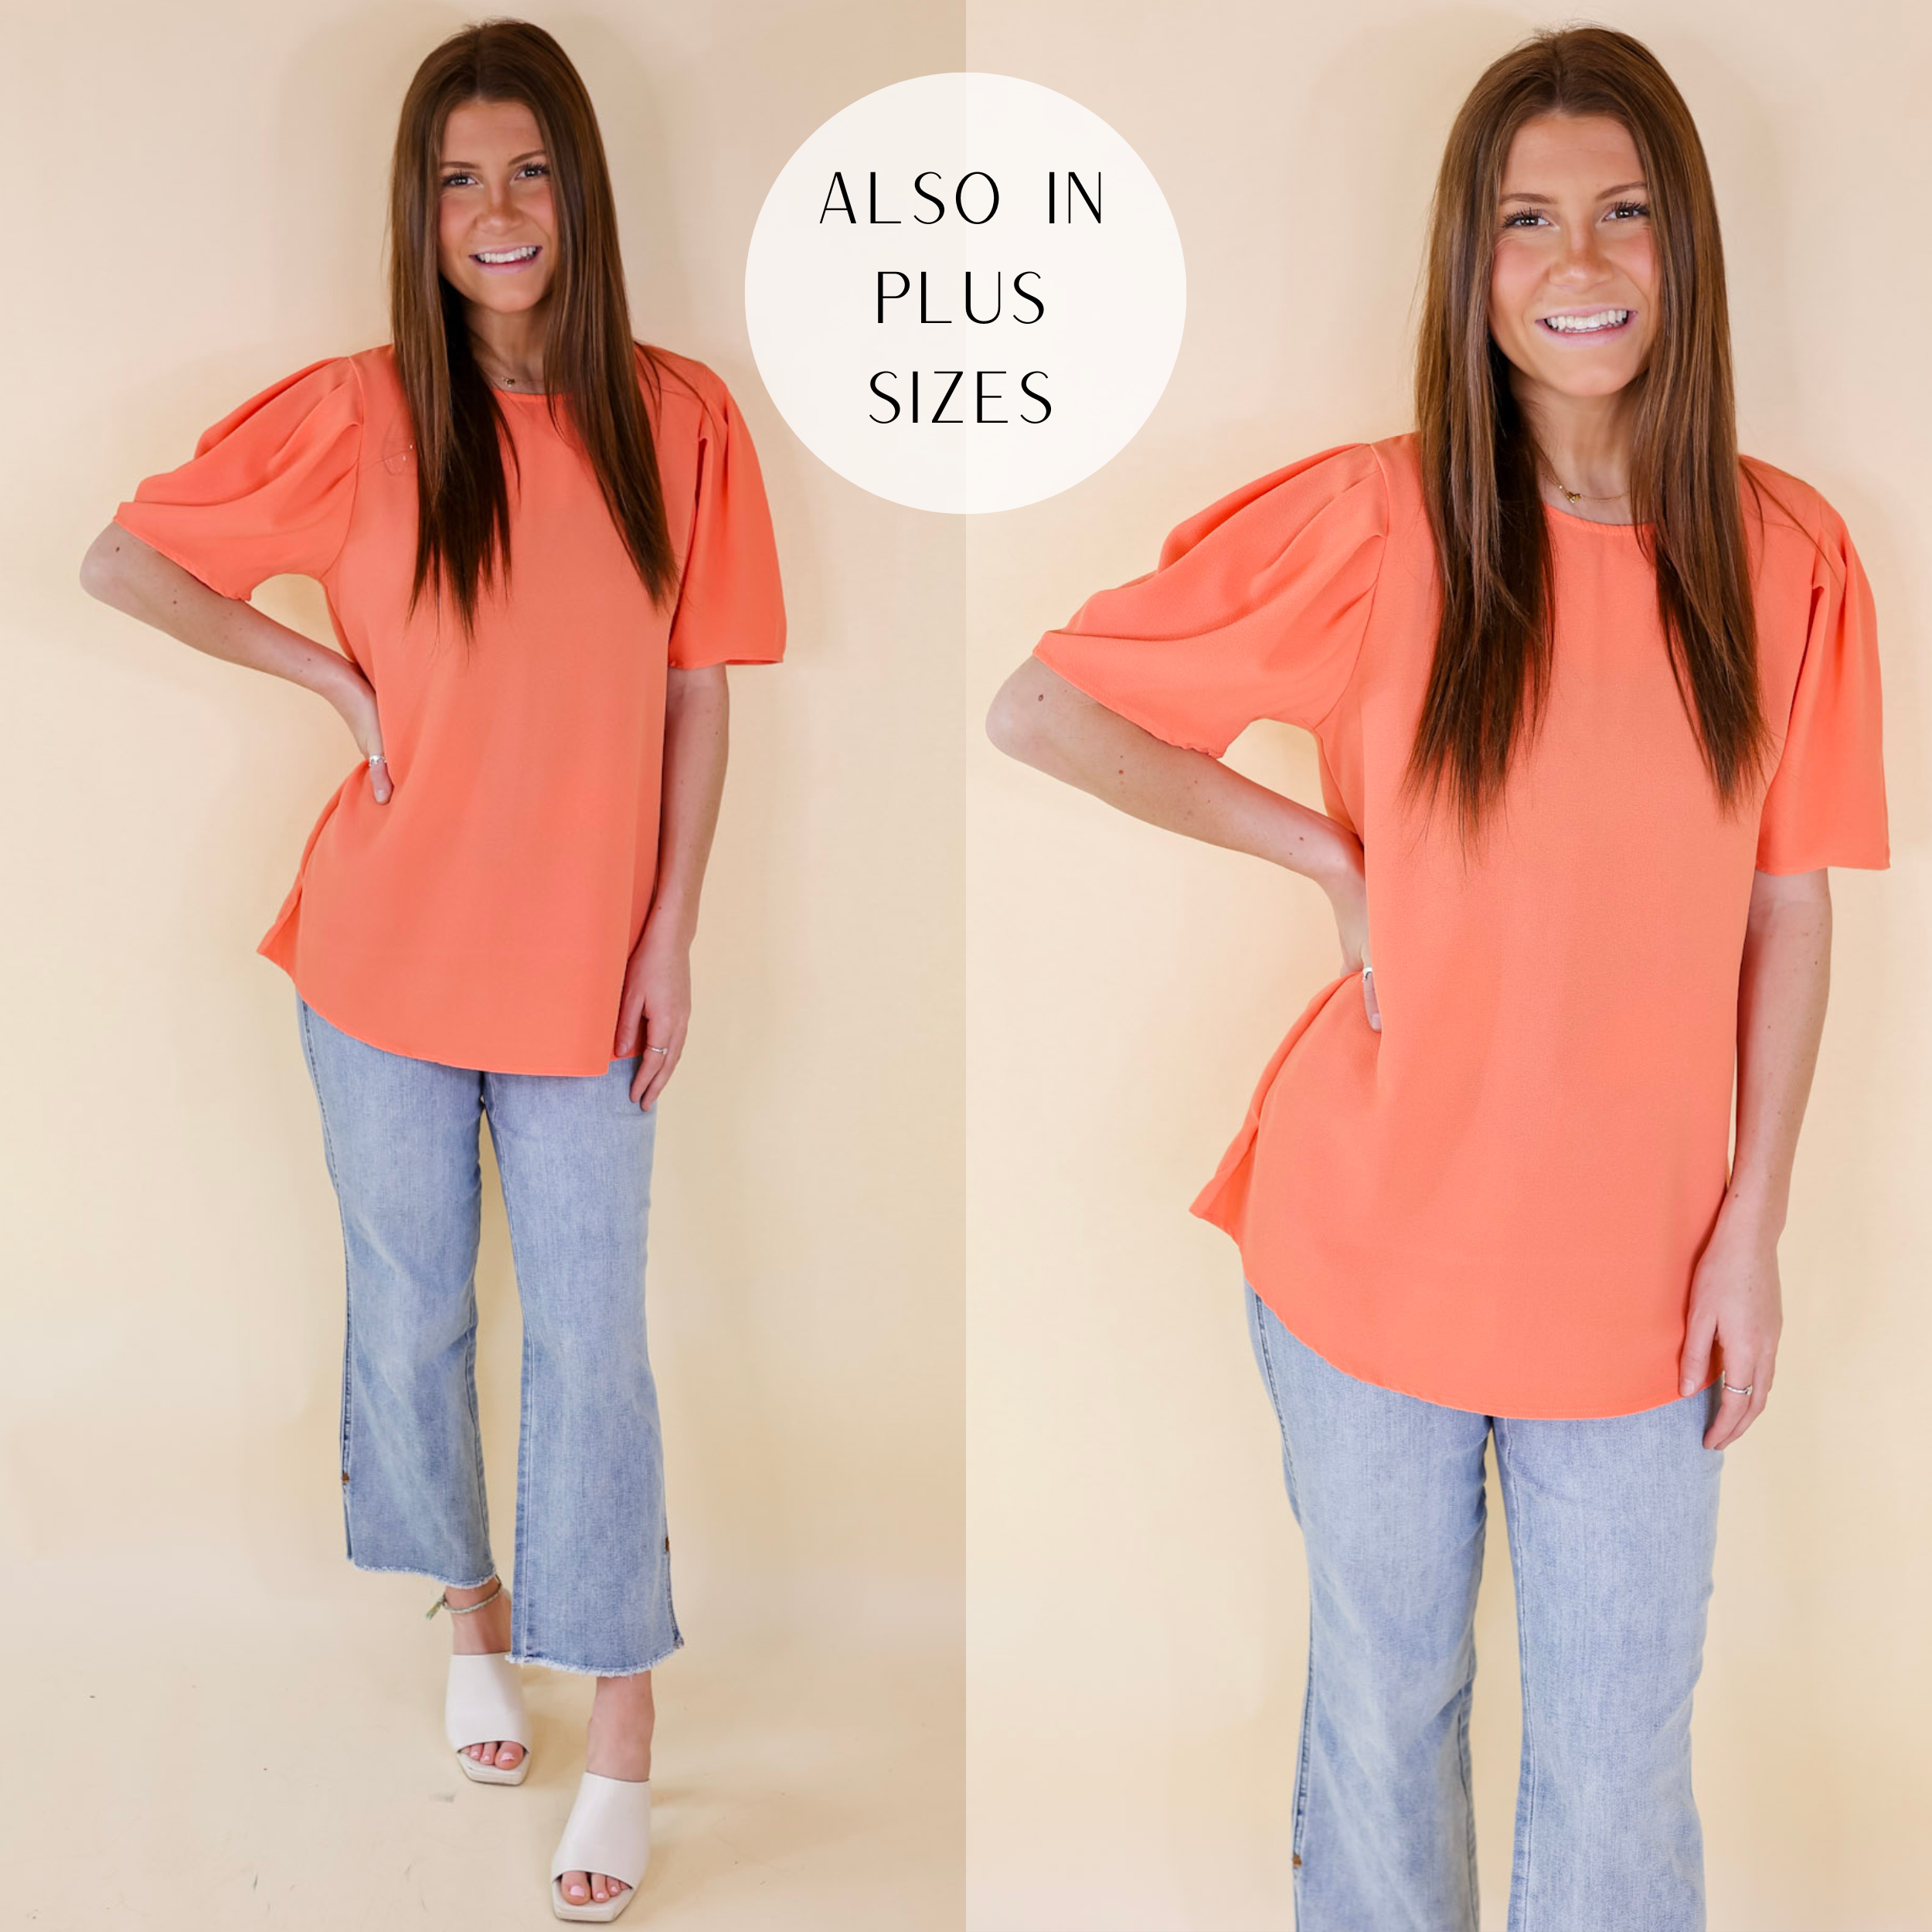 Model is wearing a short sleeve top with pleated detail on the shoulder. Model has this orange top paired with light wash jeans, ivory heels, and gold jewelry.